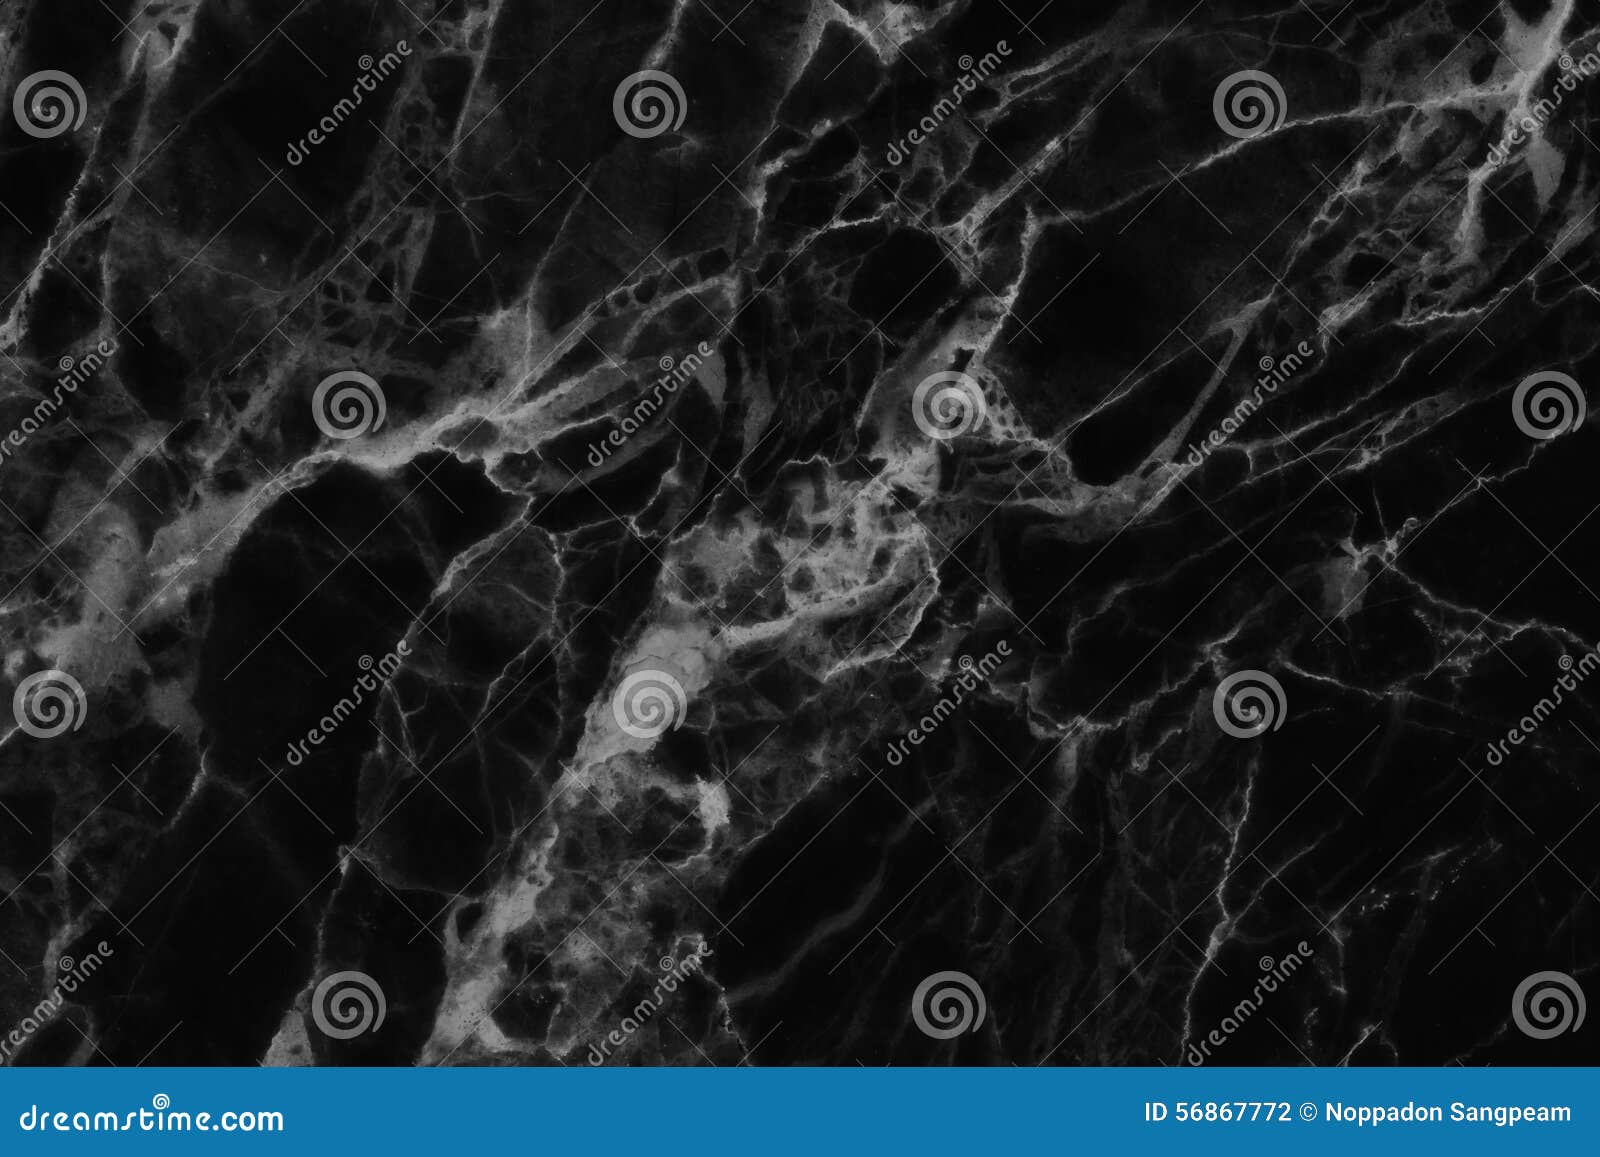 Black Marble Texture, Detailed Structure Of Marble In Natural Patterned For  Background And Design. Stock Photo 56867772 - Megapixl